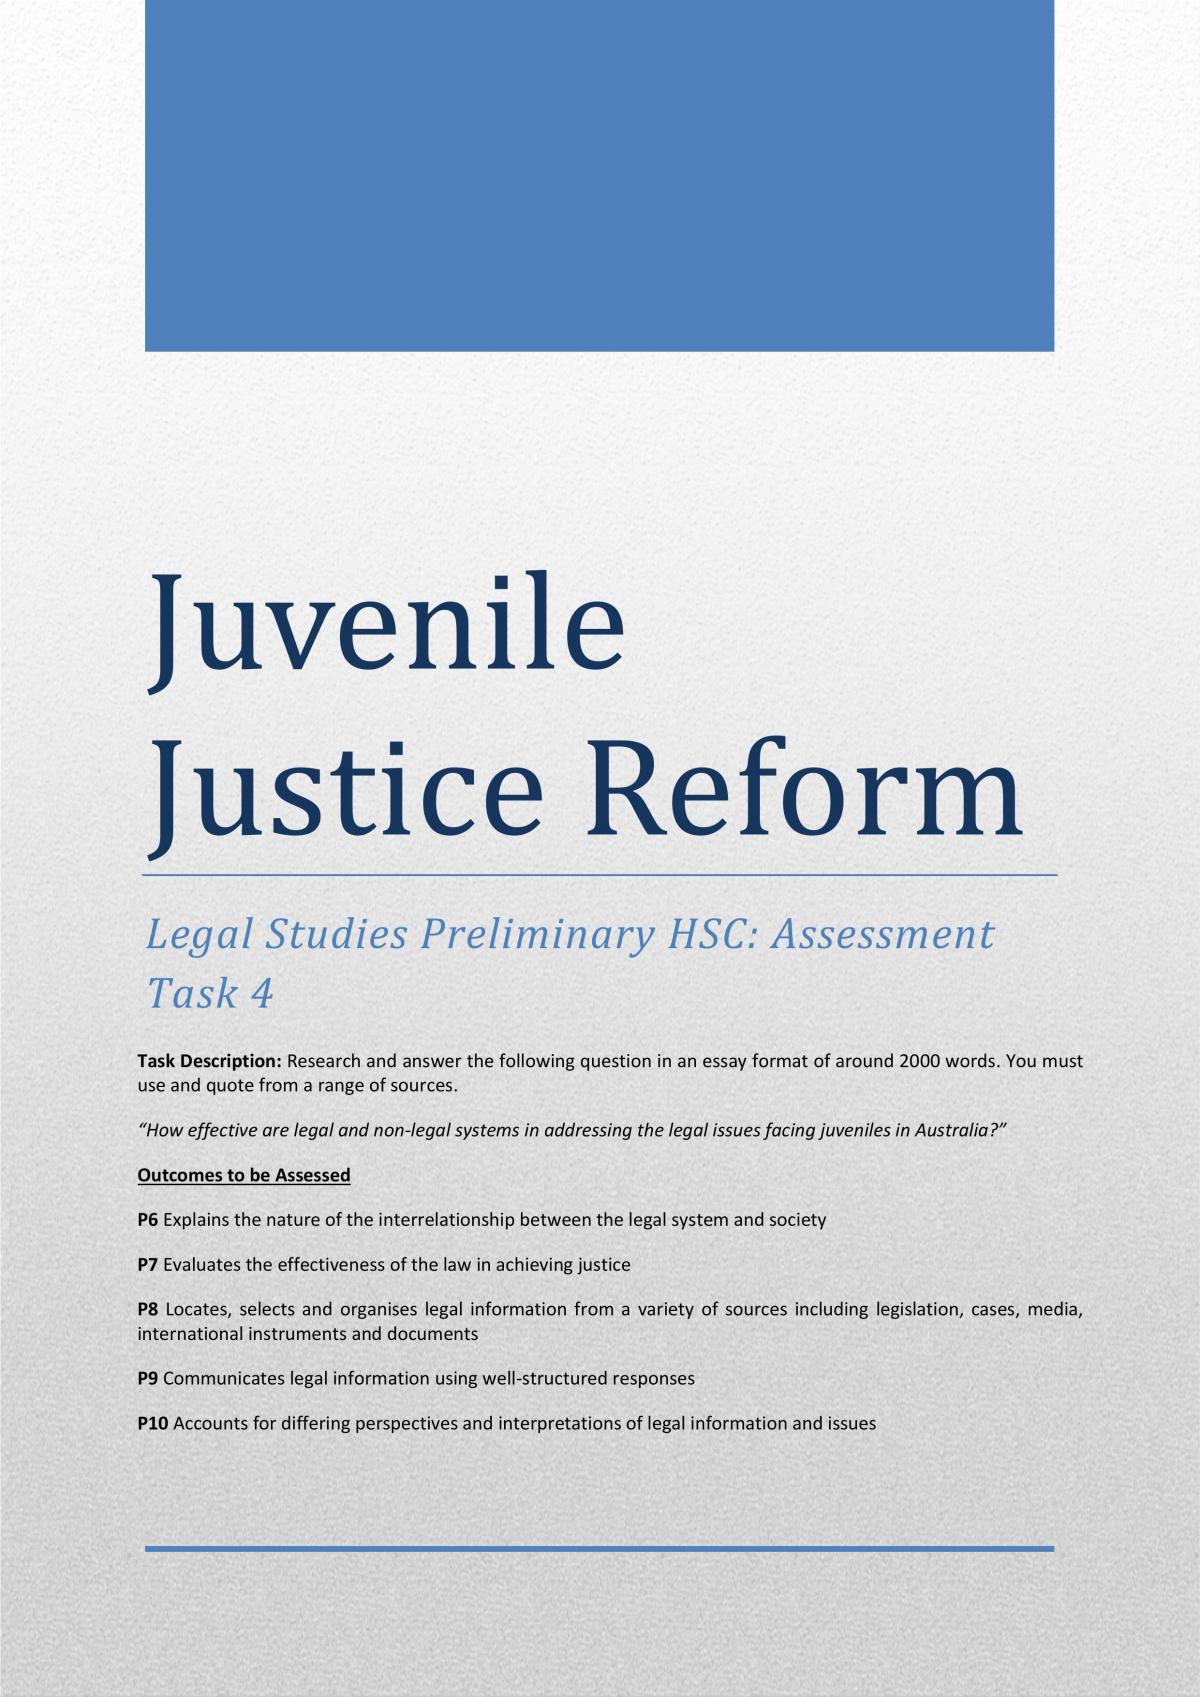 Preliminary Essay The Effectiveness Of The Juvenile Justice System In Australia Legal